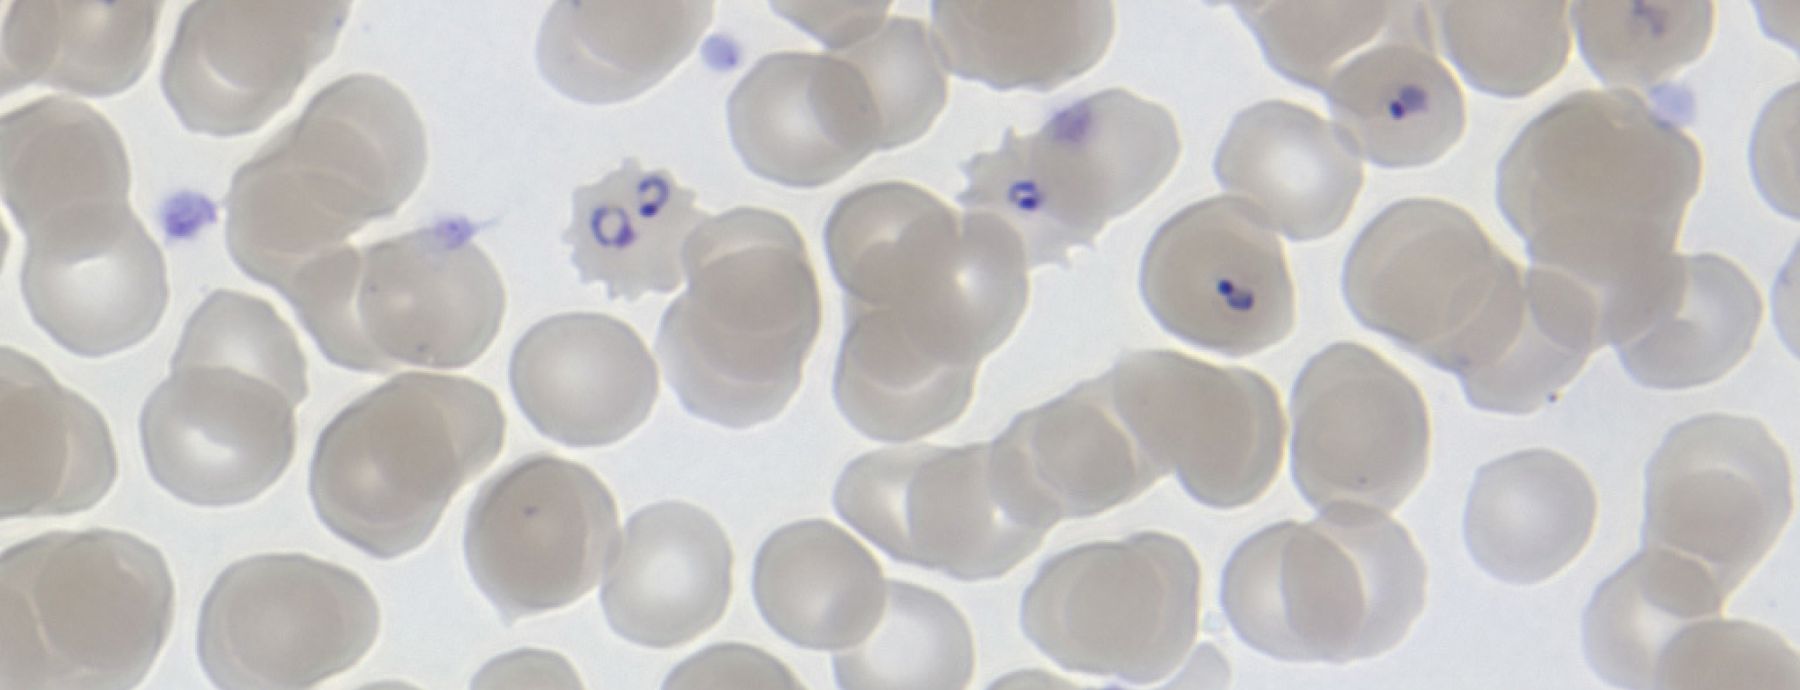 Malaria parasites can become more virulent in vaccinated hosts